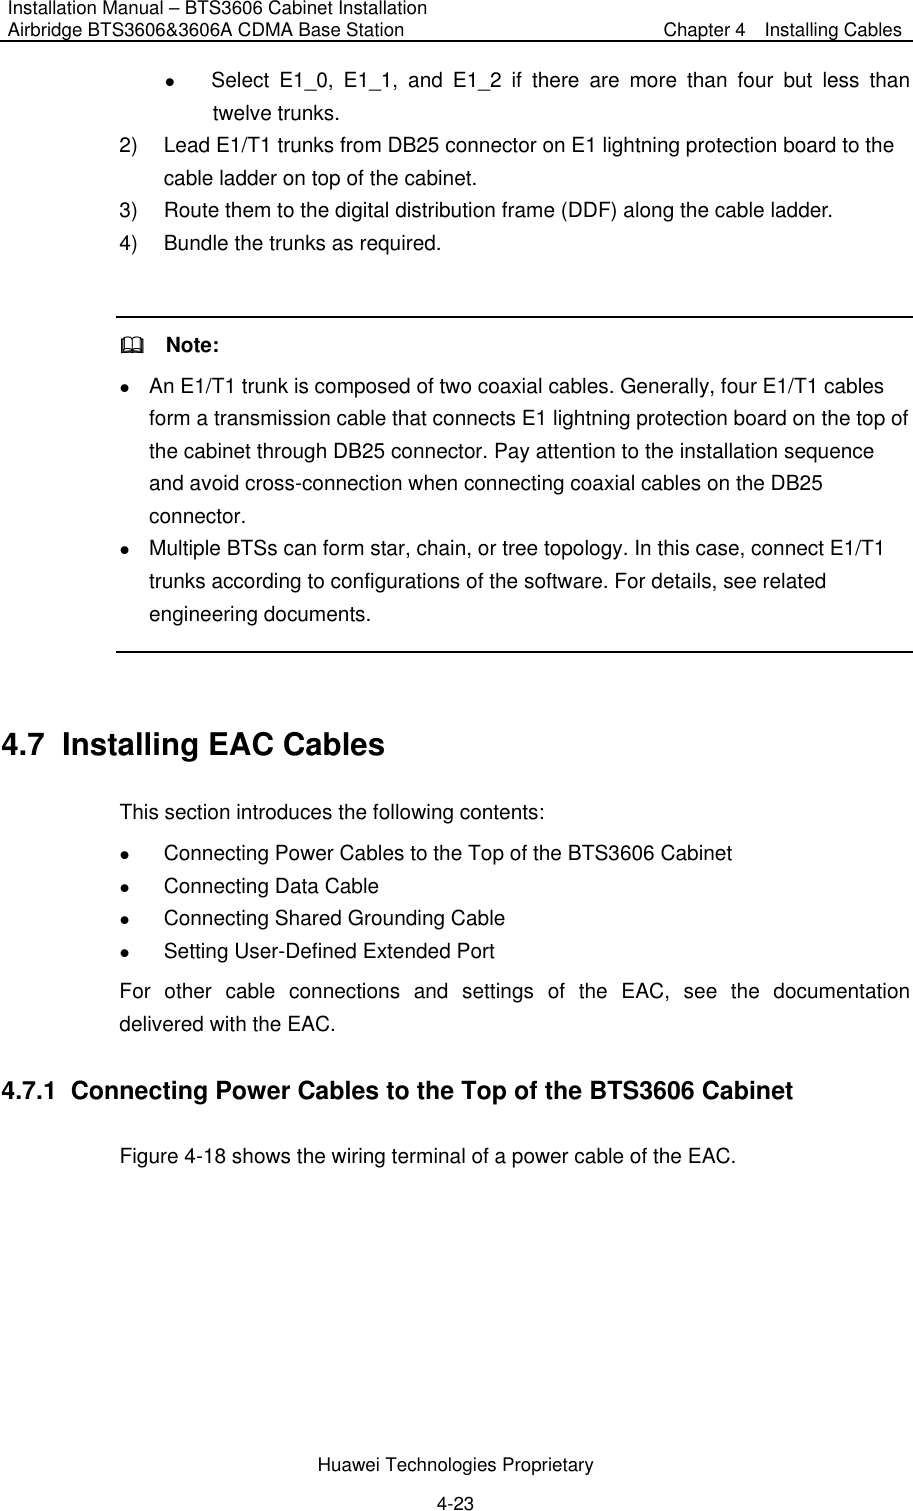 Installation Manual – BTS3606 Cabinet Installation Airbridge BTS3606&amp;3606A CDMA Base Station  Chapter 4    Installing Cables  Huawei Technologies Proprietary 4-23 z Select E1_0, E1_1, and E1_2 if there are more than four but less than twelve trunks.   2)  Lead E1/T1 trunks from DB25 connector on E1 lightning protection board to the cable ladder on top of the cabinet.   3)  Route them to the digital distribution frame (DDF) along the cable ladder.   4)  Bundle the trunks as required.      Note: z An E1/T1 trunk is composed of two coaxial cables. Generally, four E1/T1 cables form a transmission cable that connects E1 lightning protection board on the top of the cabinet through DB25 connector. Pay attention to the installation sequence and avoid cross-connection when connecting coaxial cables on the DB25 connector. z Multiple BTSs can form star, chain, or tree topology. In this case, connect E1/T1 trunks according to configurations of the software. For details, see related engineering documents.    4.7  Installing EAC Cables This section introduces the following contents:   z Connecting Power Cables to the Top of the BTS3606 Cabinet z Connecting Data Cable z Connecting Shared Grounding Cable z Setting User-Defined Extended Port For other cable connections and settings of the EAC, see the documentation delivered with the EAC. 4.7.1  Connecting Power Cables to the Top of the BTS3606 Cabinet Figure 4-18 shows the wiring terminal of a power cable of the EAC. 